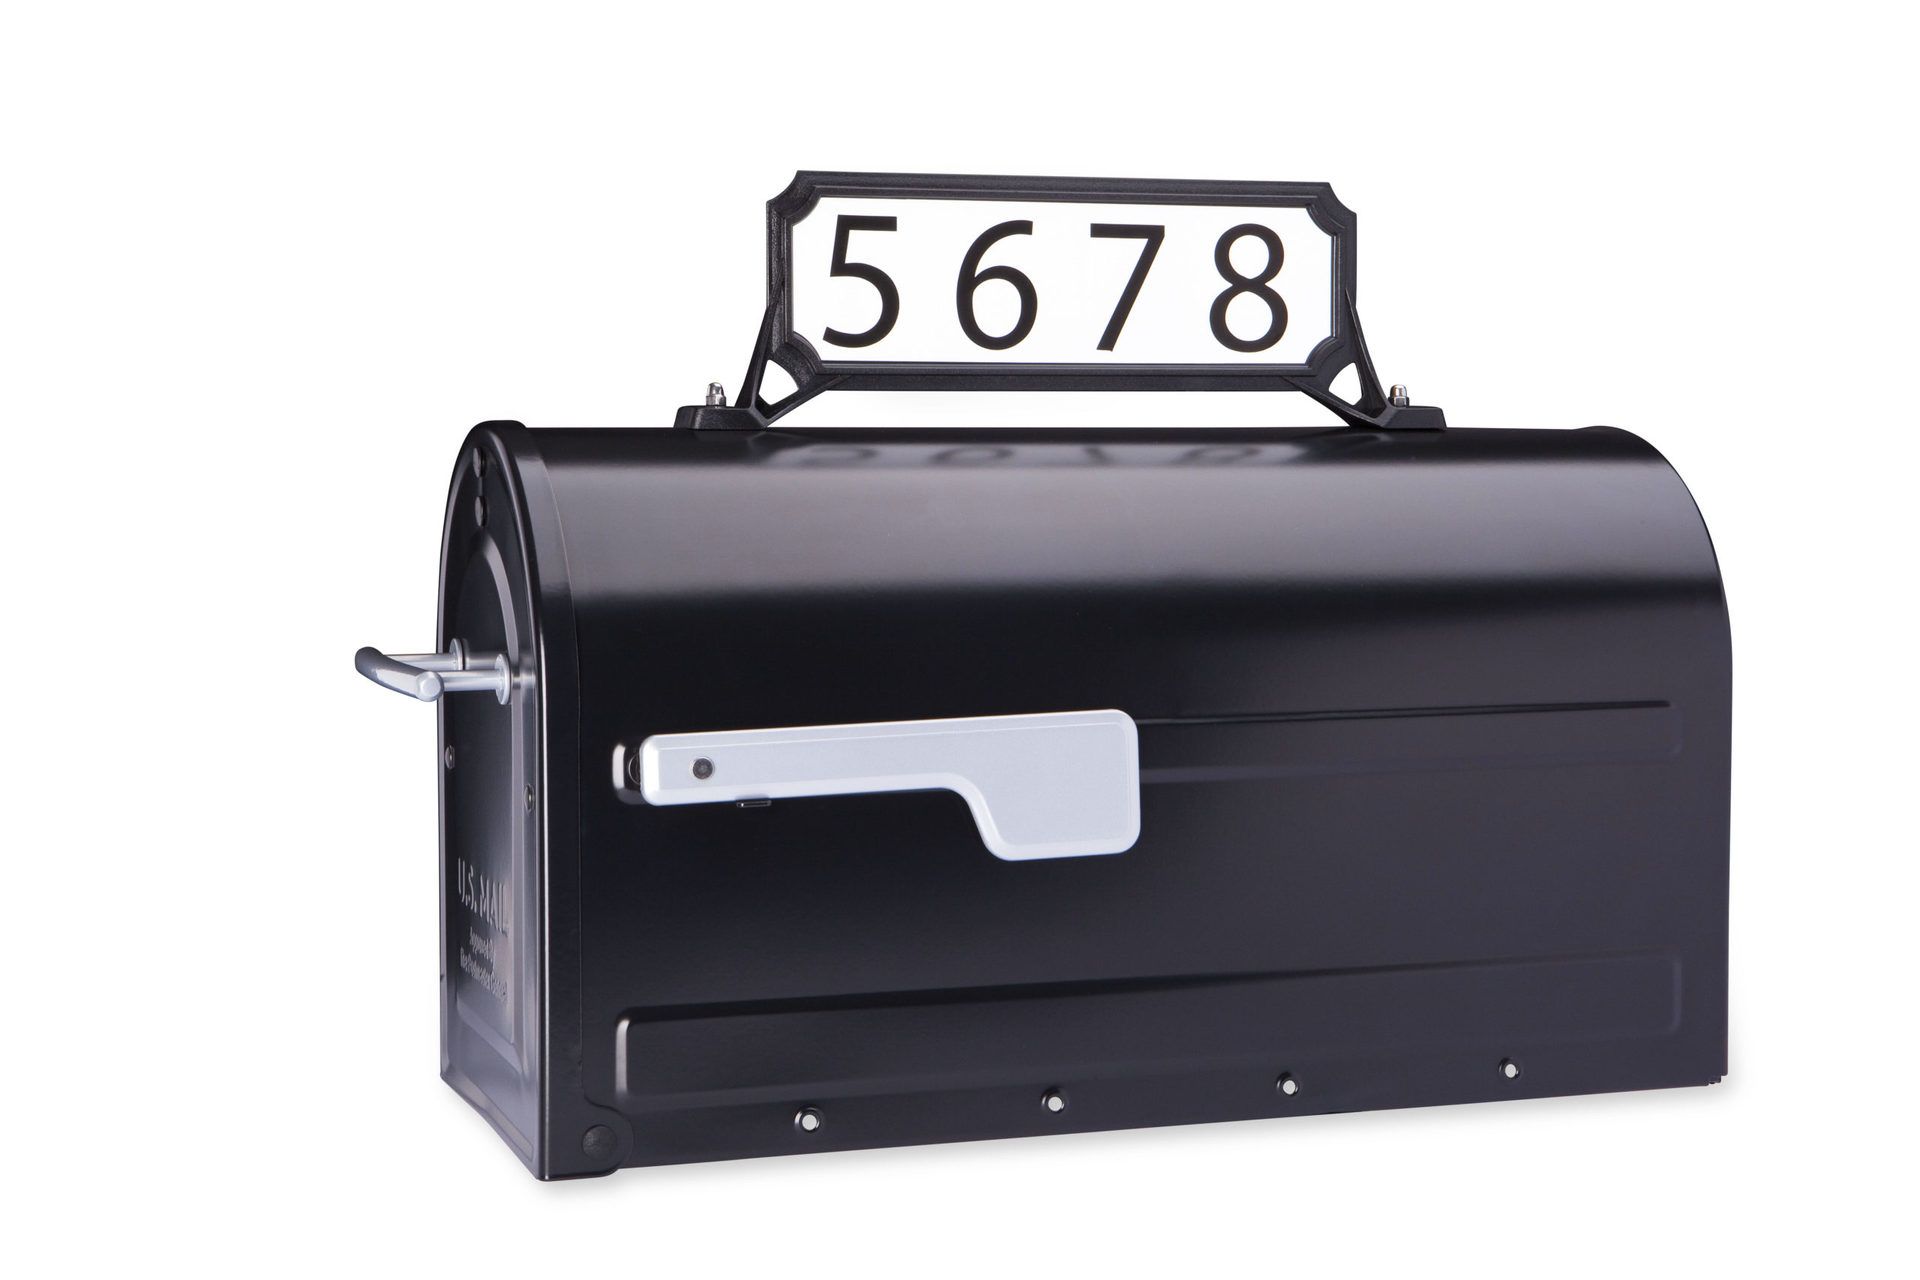 Black mailbox with silver flag and address on top